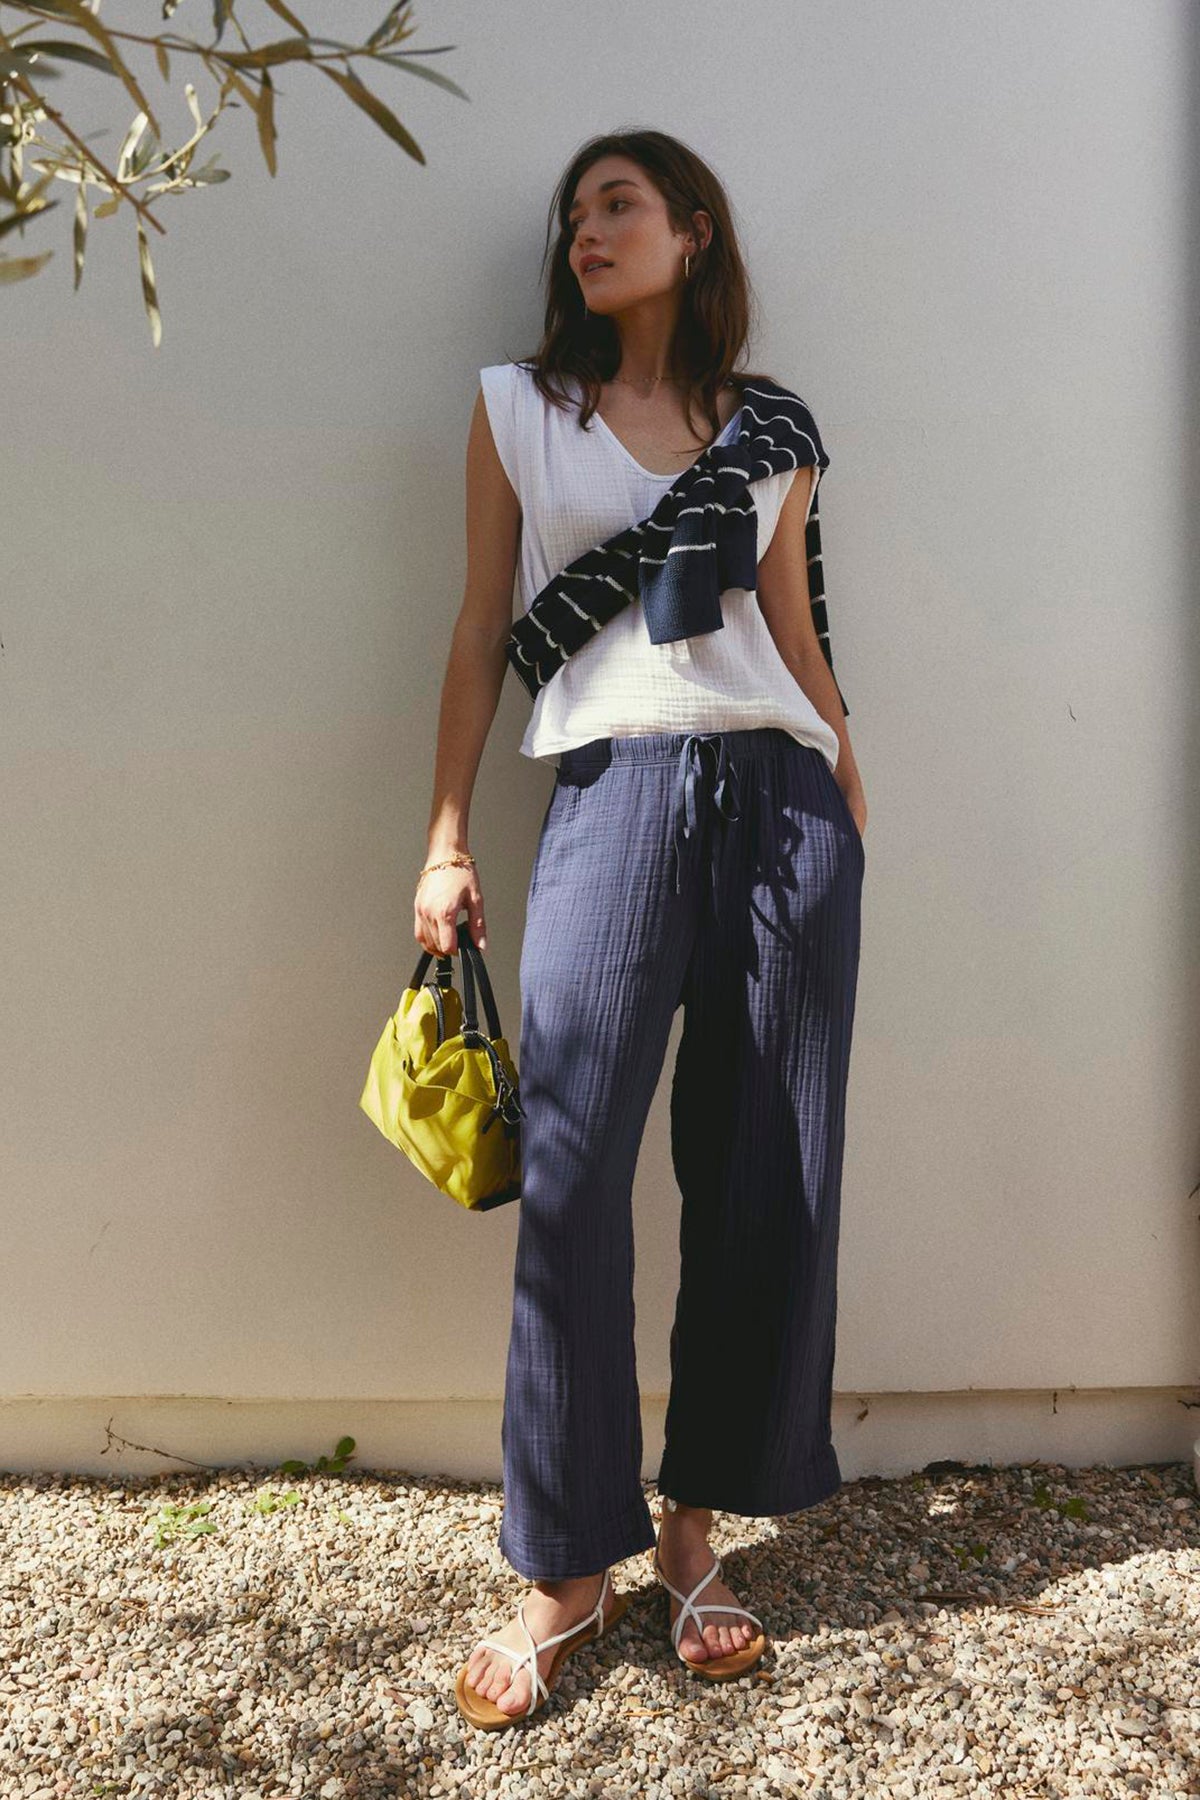   A woman in a JAYLA COTTON GAUZE TANK TOP by Velvet by Graham & Spencer and blue striped pants stands against a light wall, holding a yellow bag, with sunlight casting shadows of leaves. 